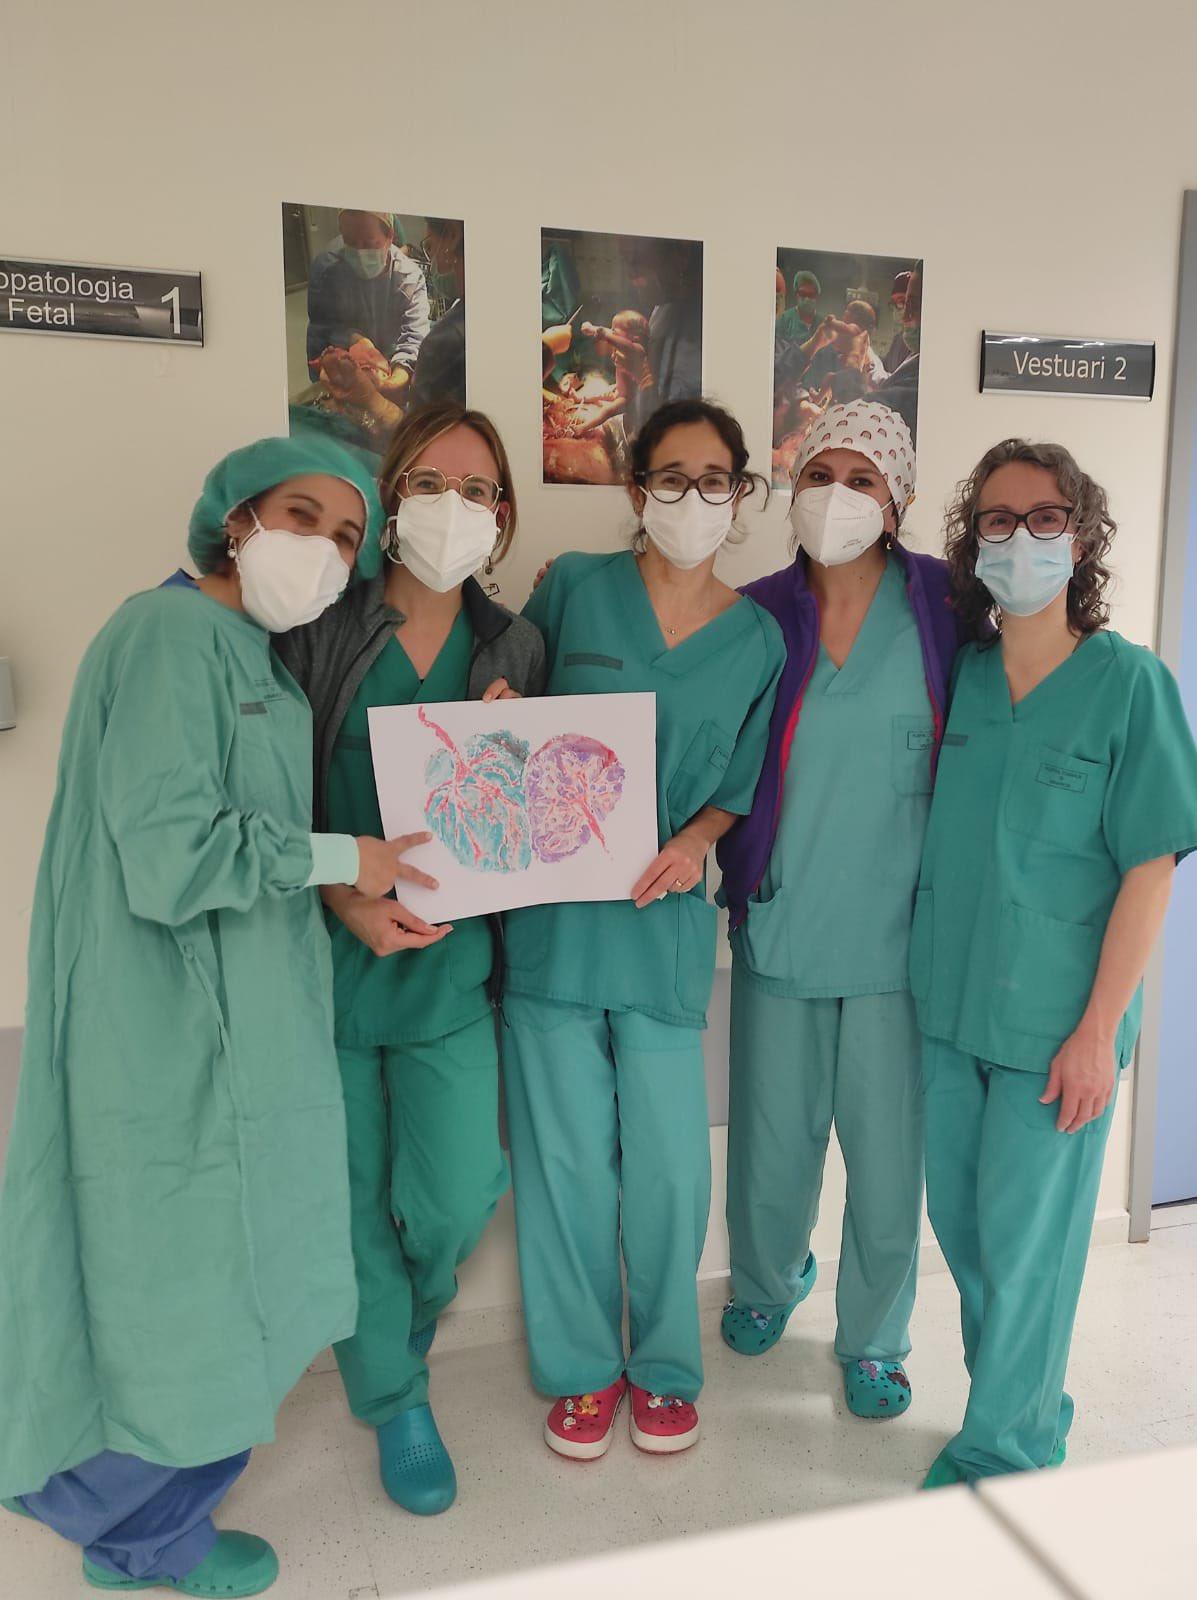 Ana Teijero with other doctors and their painting, at GVA Salut Vinaròs, after the twins were born. (Courtesy of Ana Teijelo Deiros)